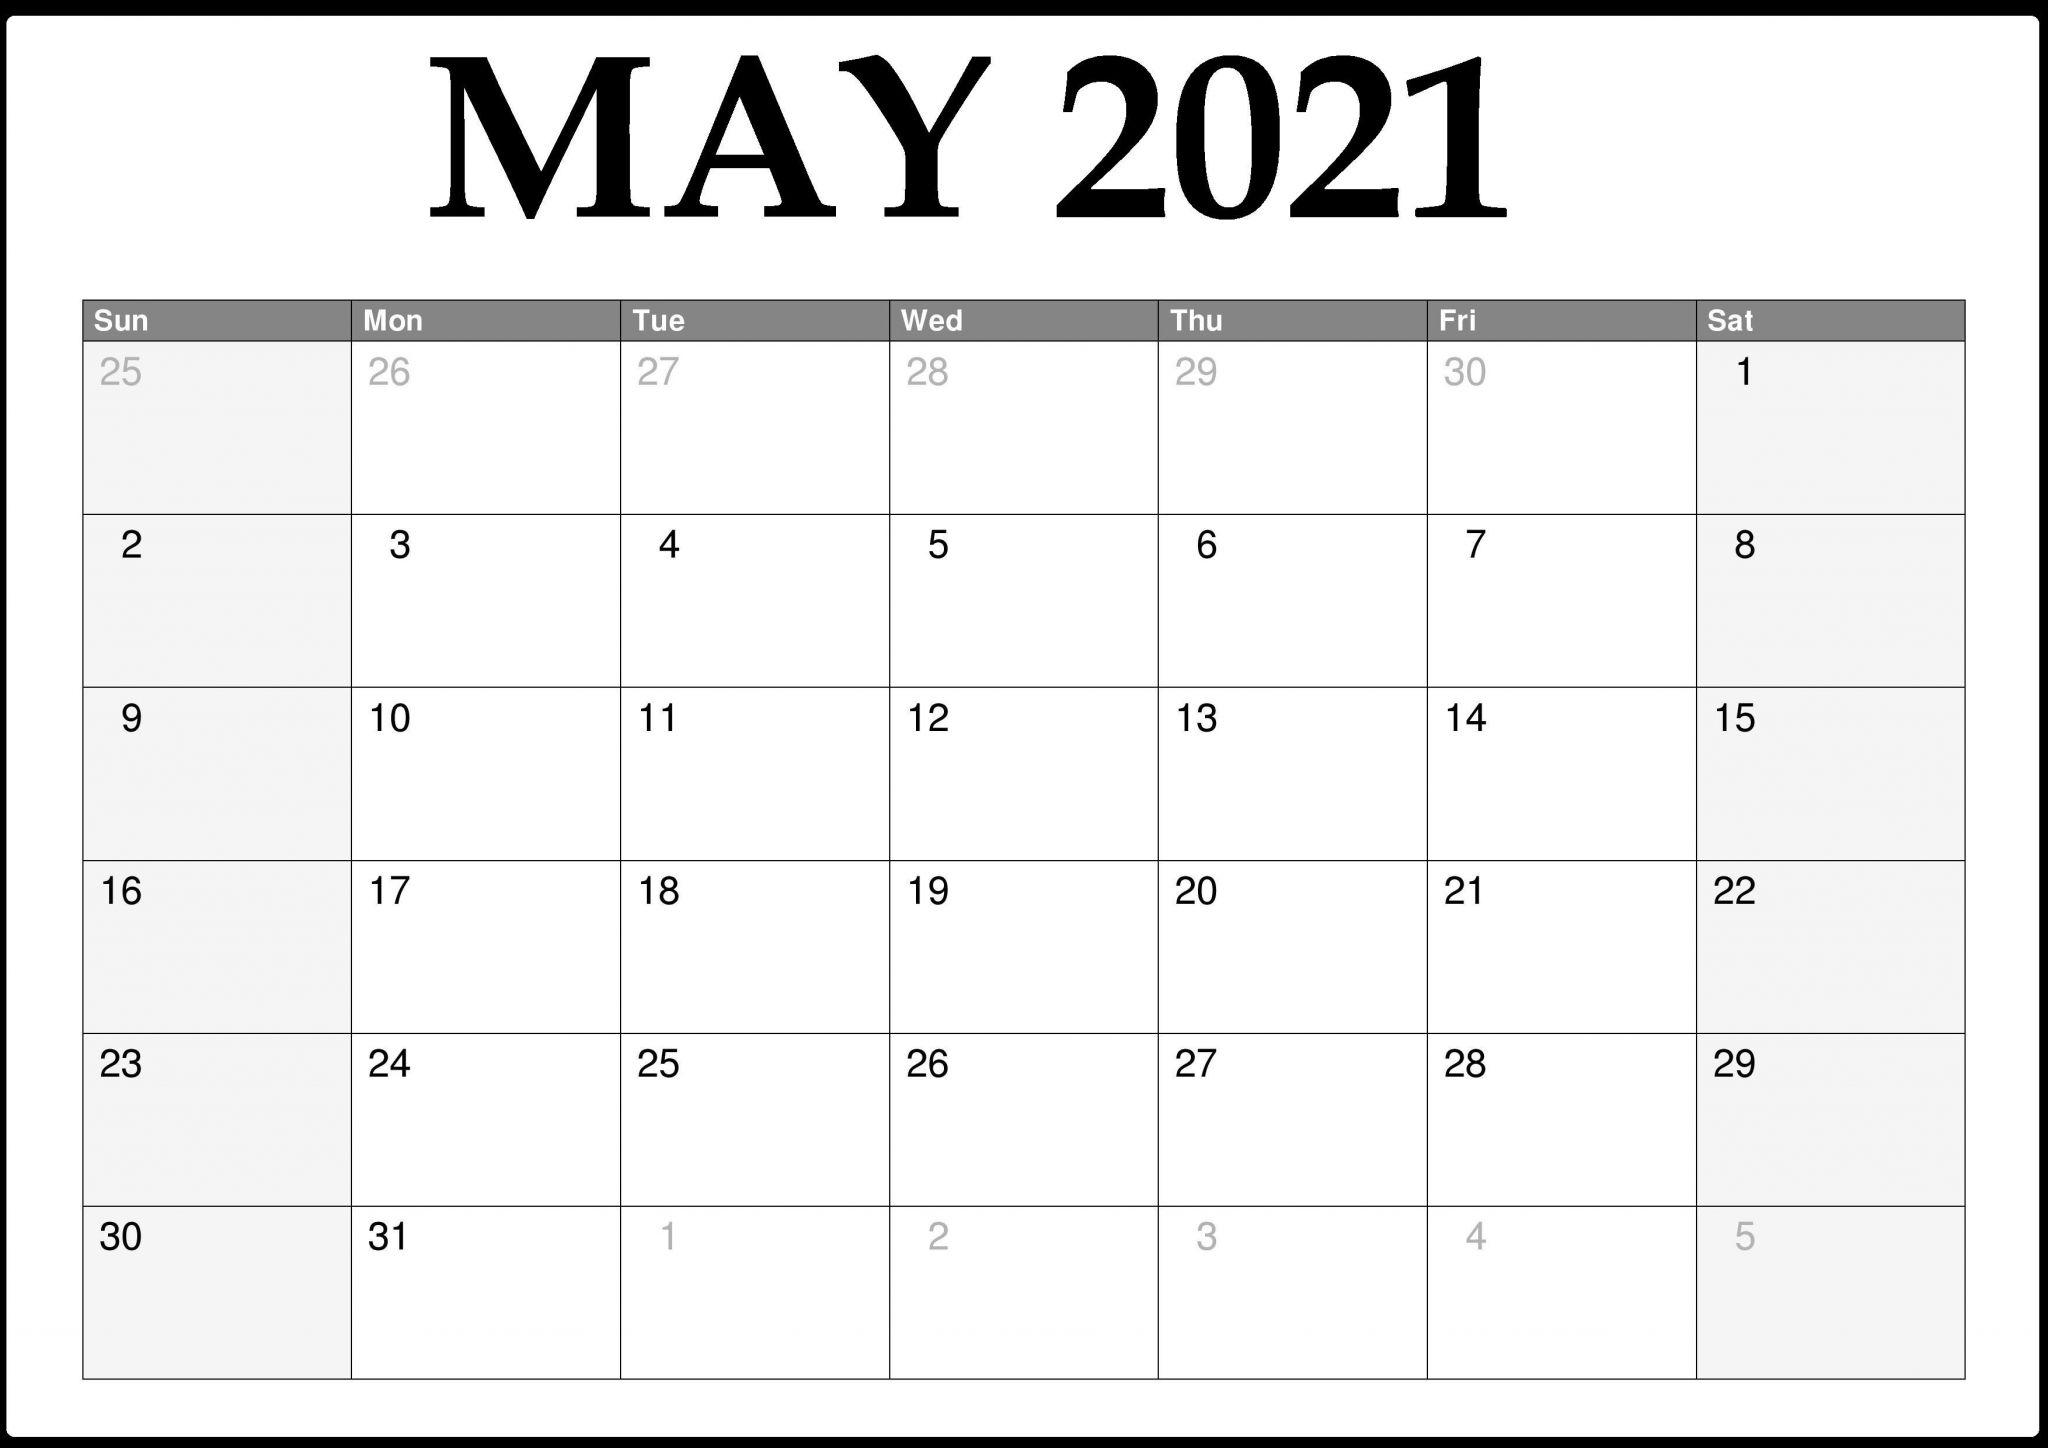 monthly calendar may 2021